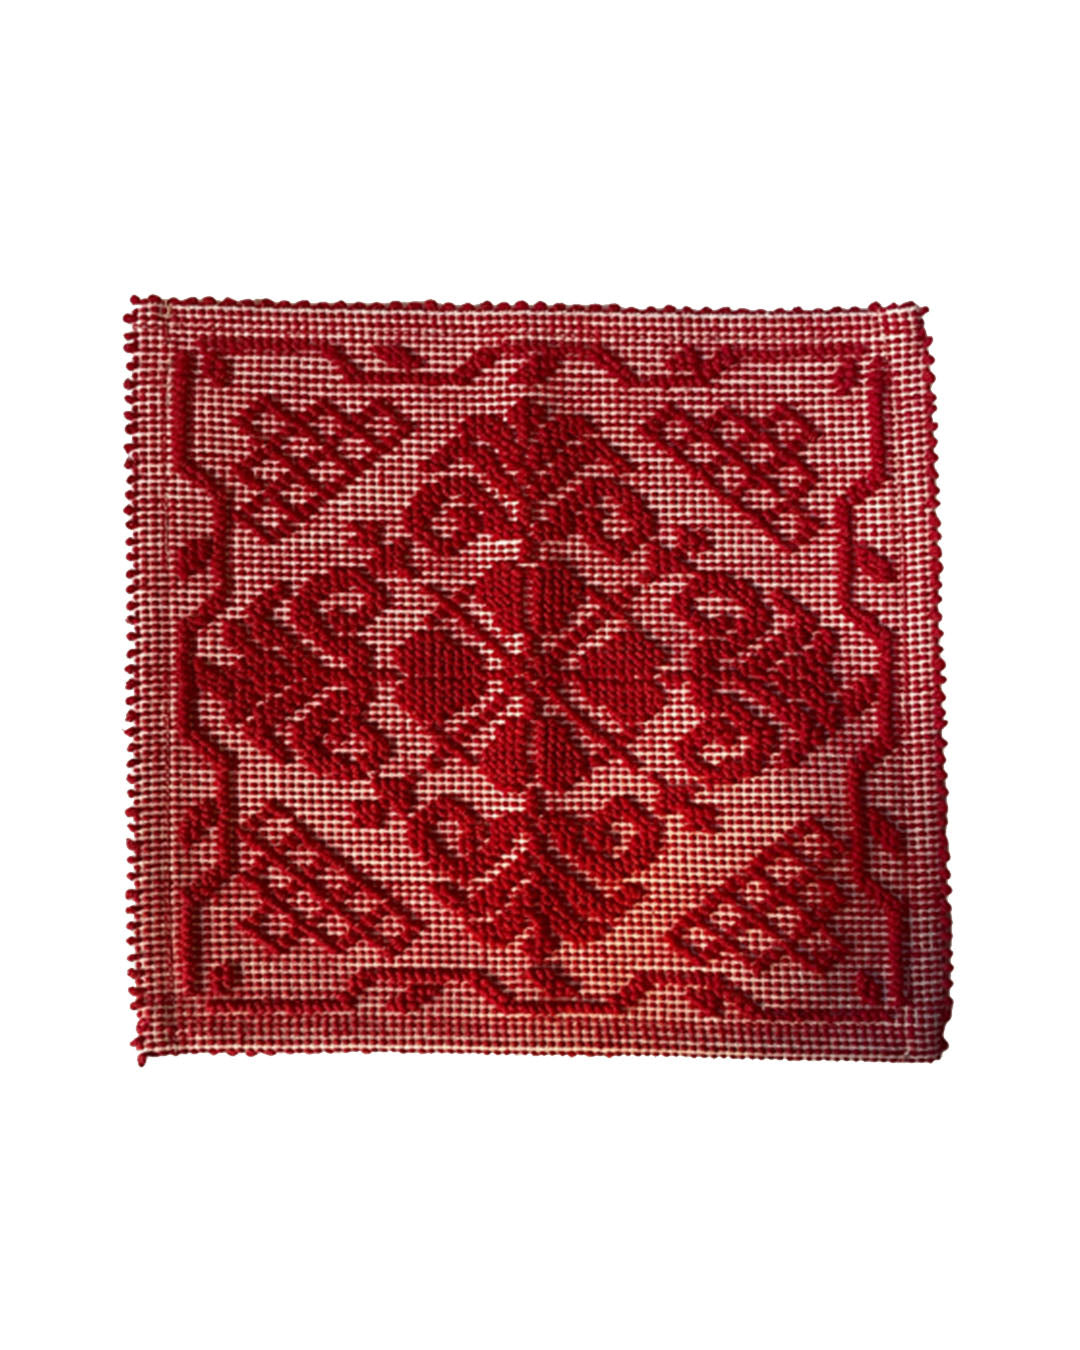 Cotton placemat handmade handcrafted red